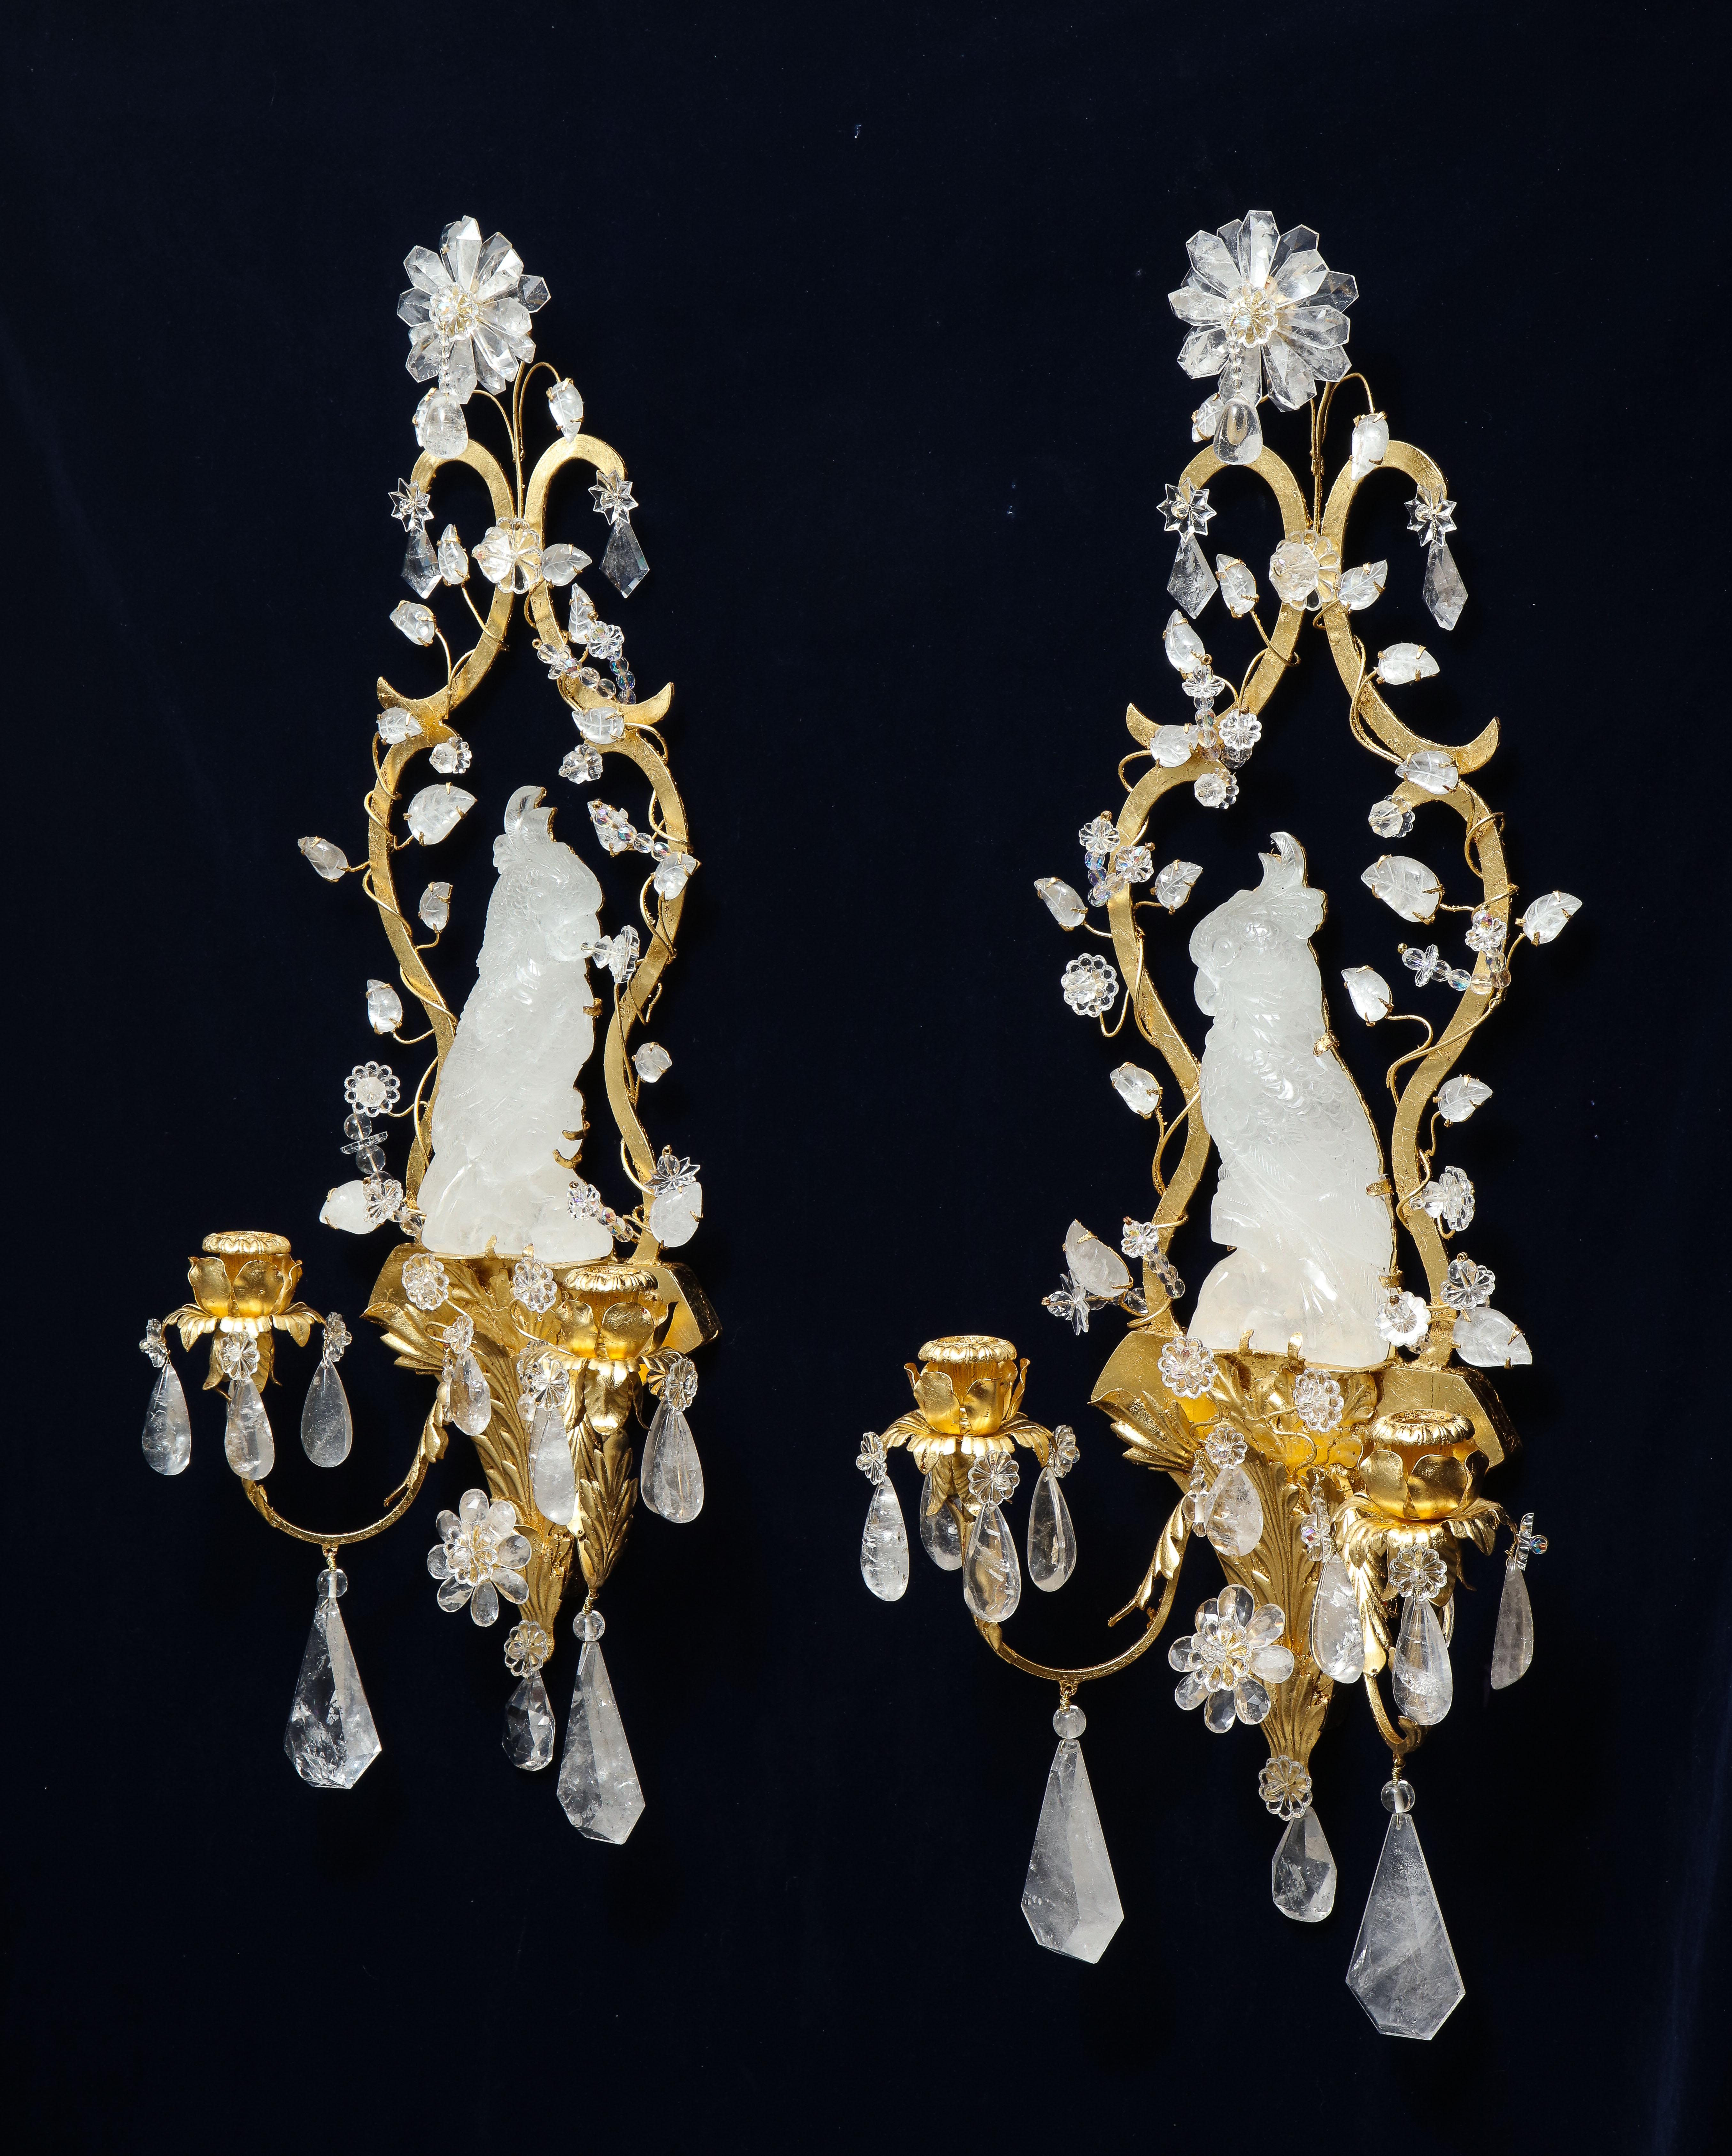 A fabulous pair of French Mid-Century Modern Louis XVI style and Bagues style cockatoo-form rock crystal and 24k gilt metal wall appliques/sconces. Each of these sconces is modeled after the beautiful cockatoo bird. The center of the sconces is